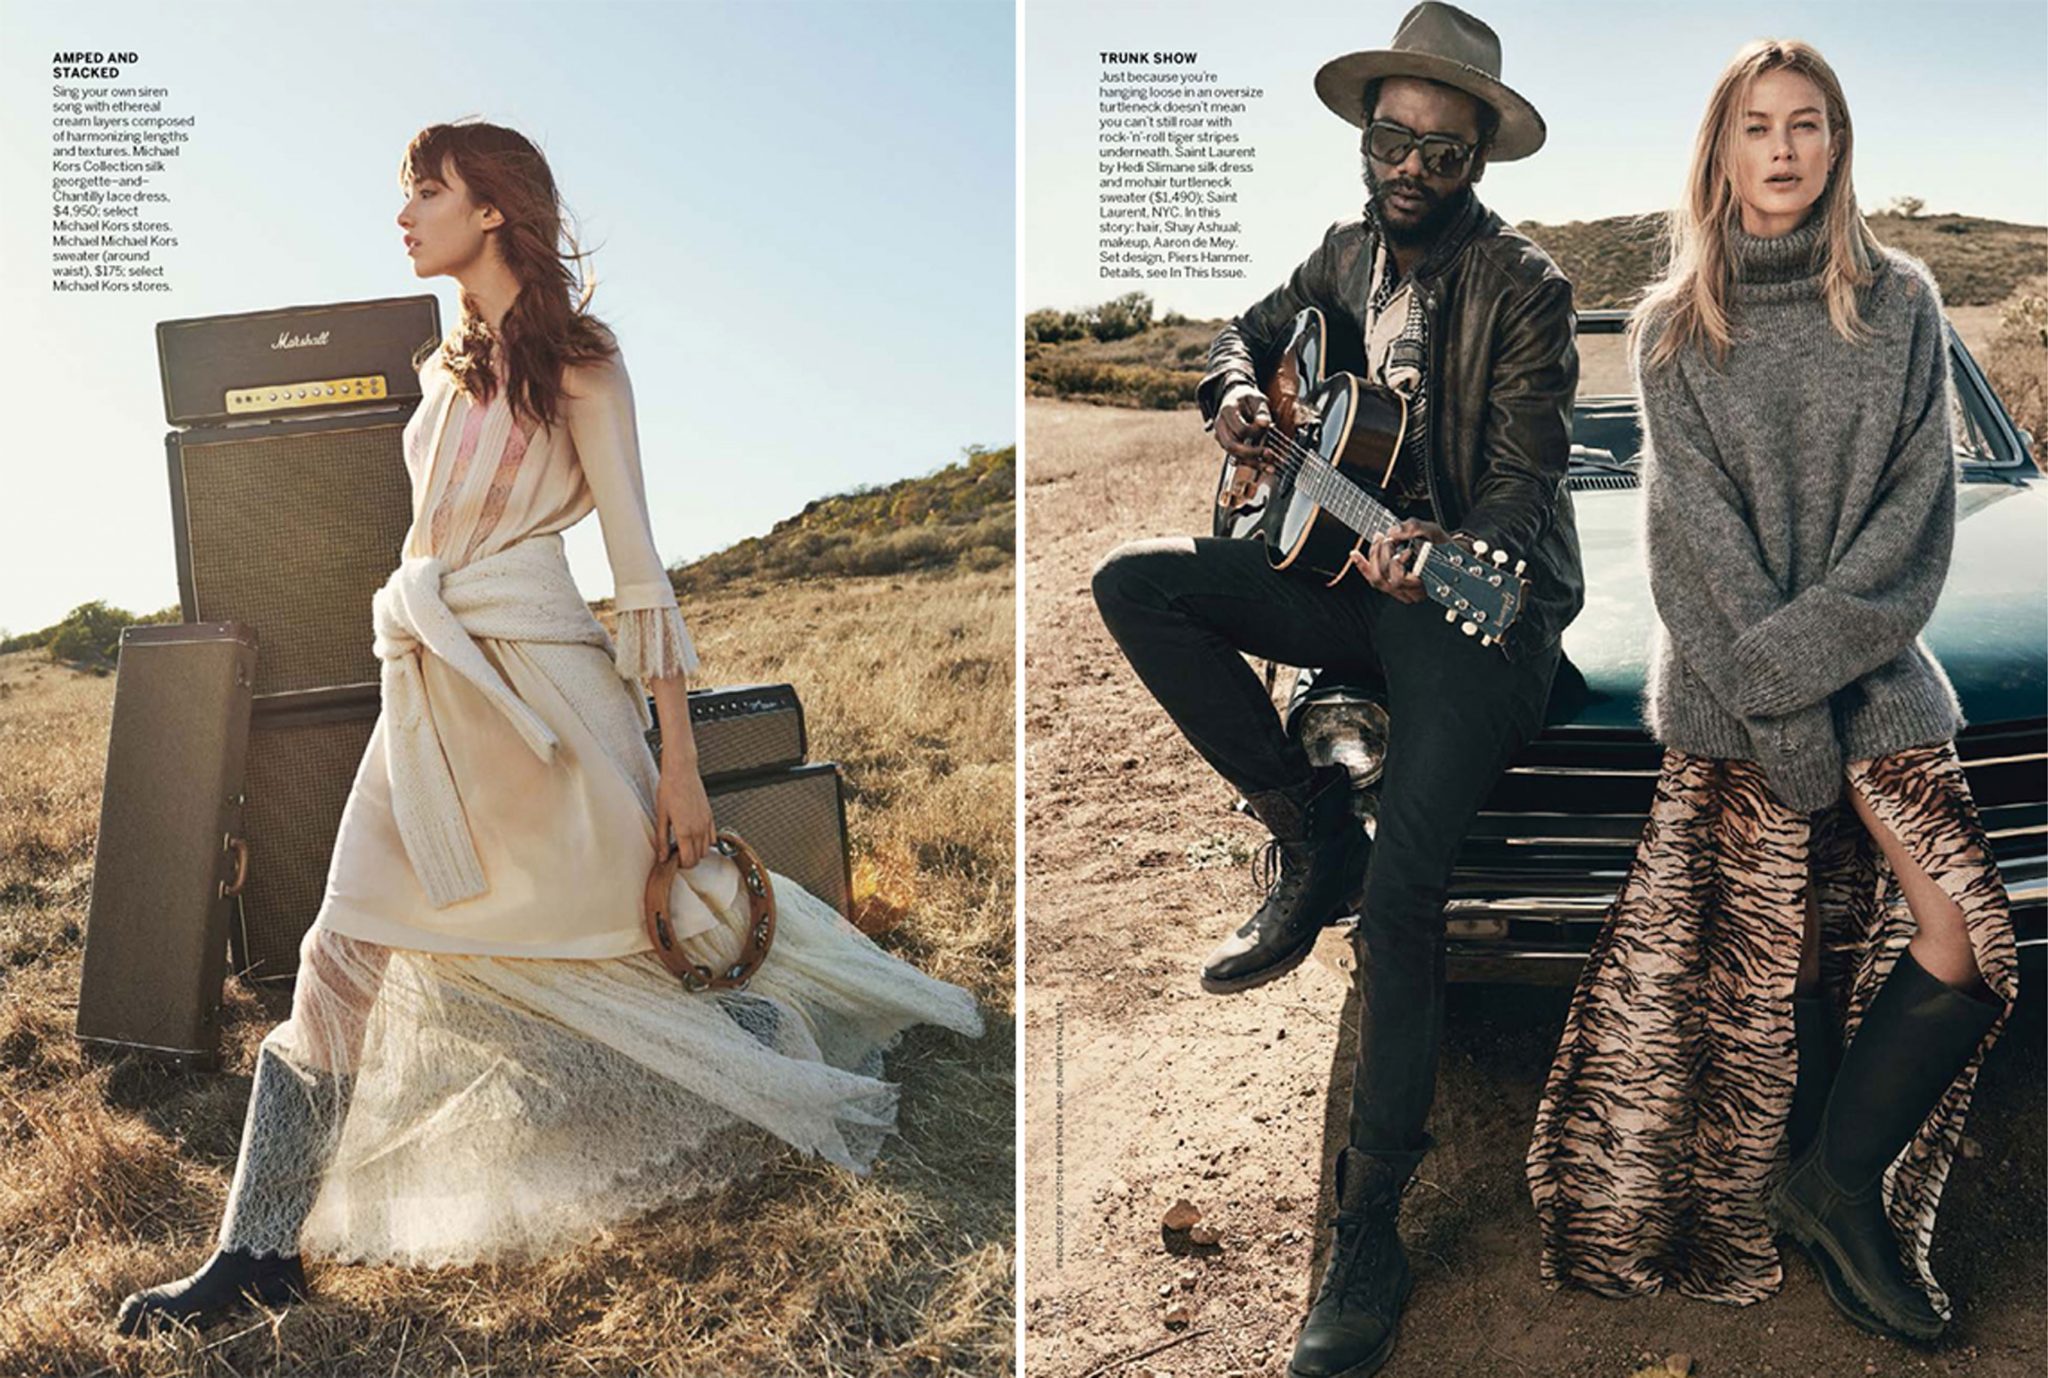 Michael Philouze | Vogue US: I'm With the Band | 7